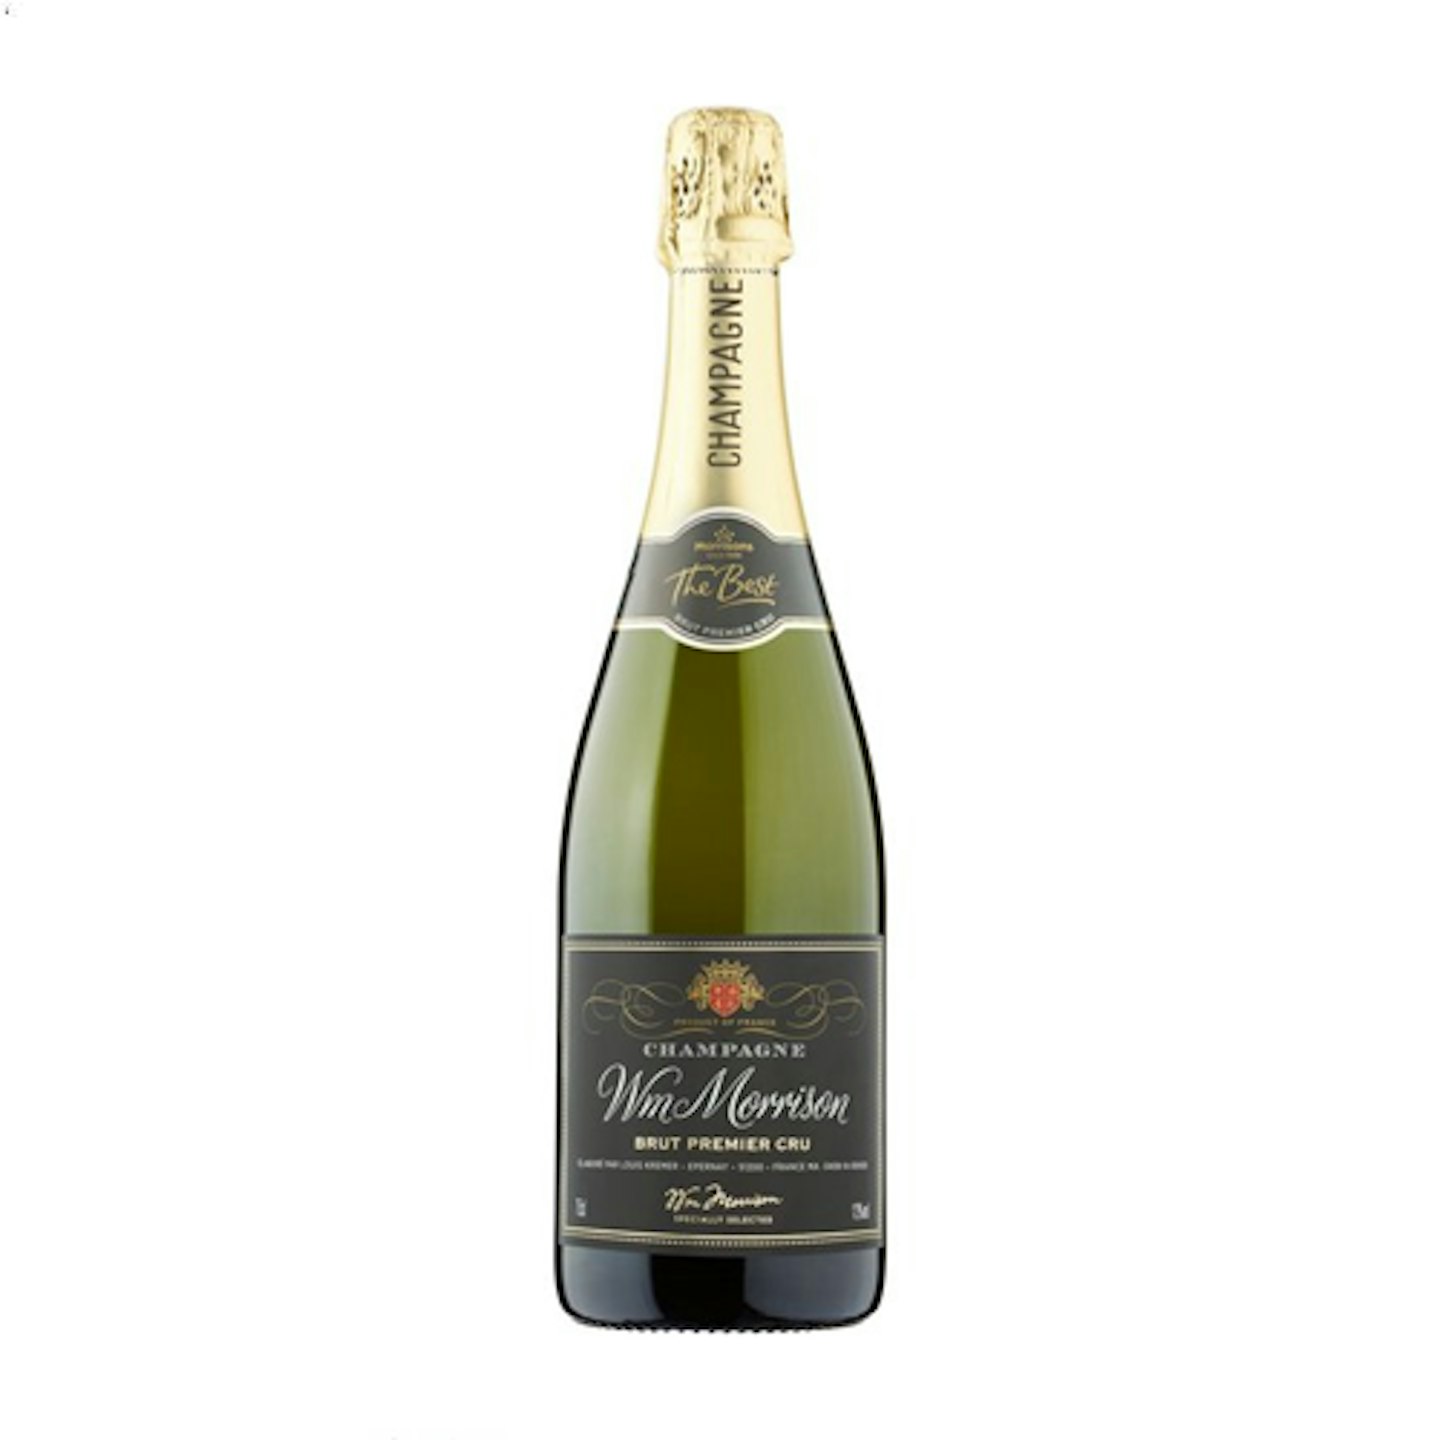 The Best Brut Premier Cru Champagne from Morrisons 